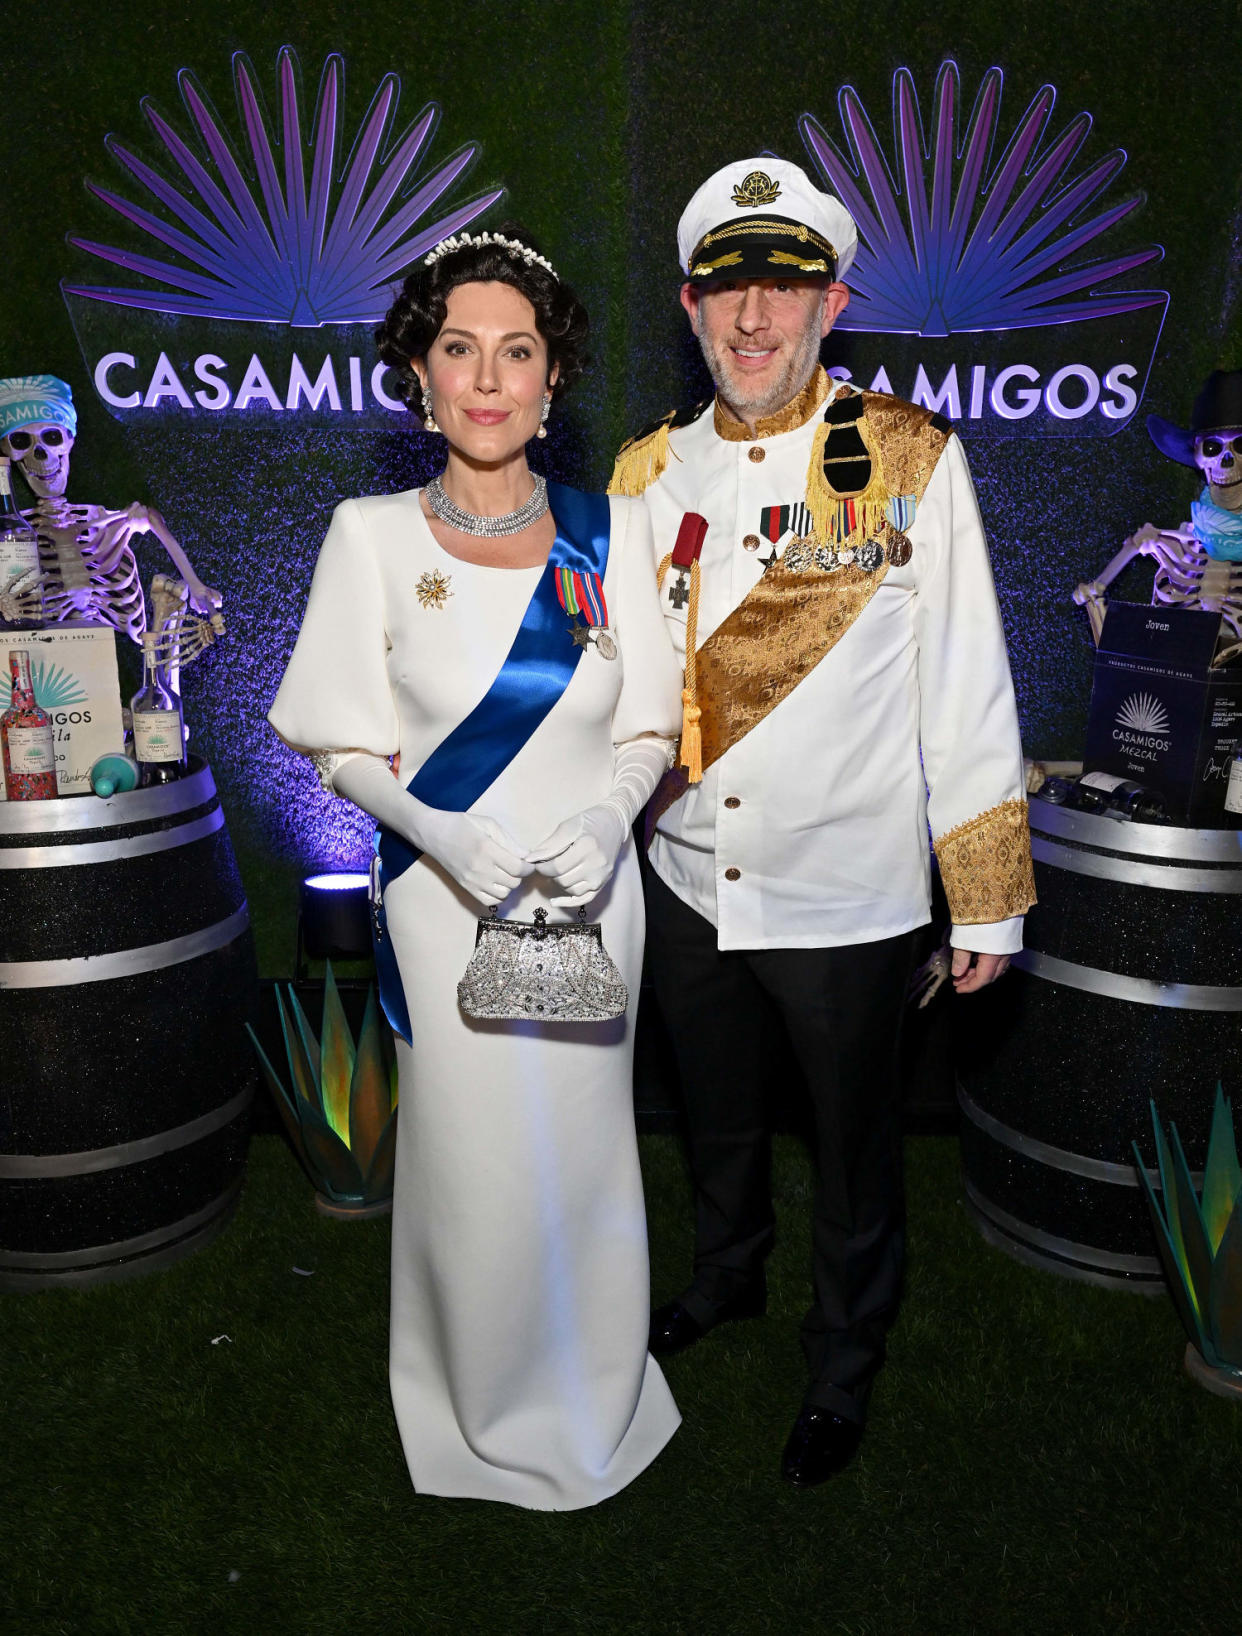 Famous Couples Costumes
 (Michael Kovac / Getty Images for Casamigos)